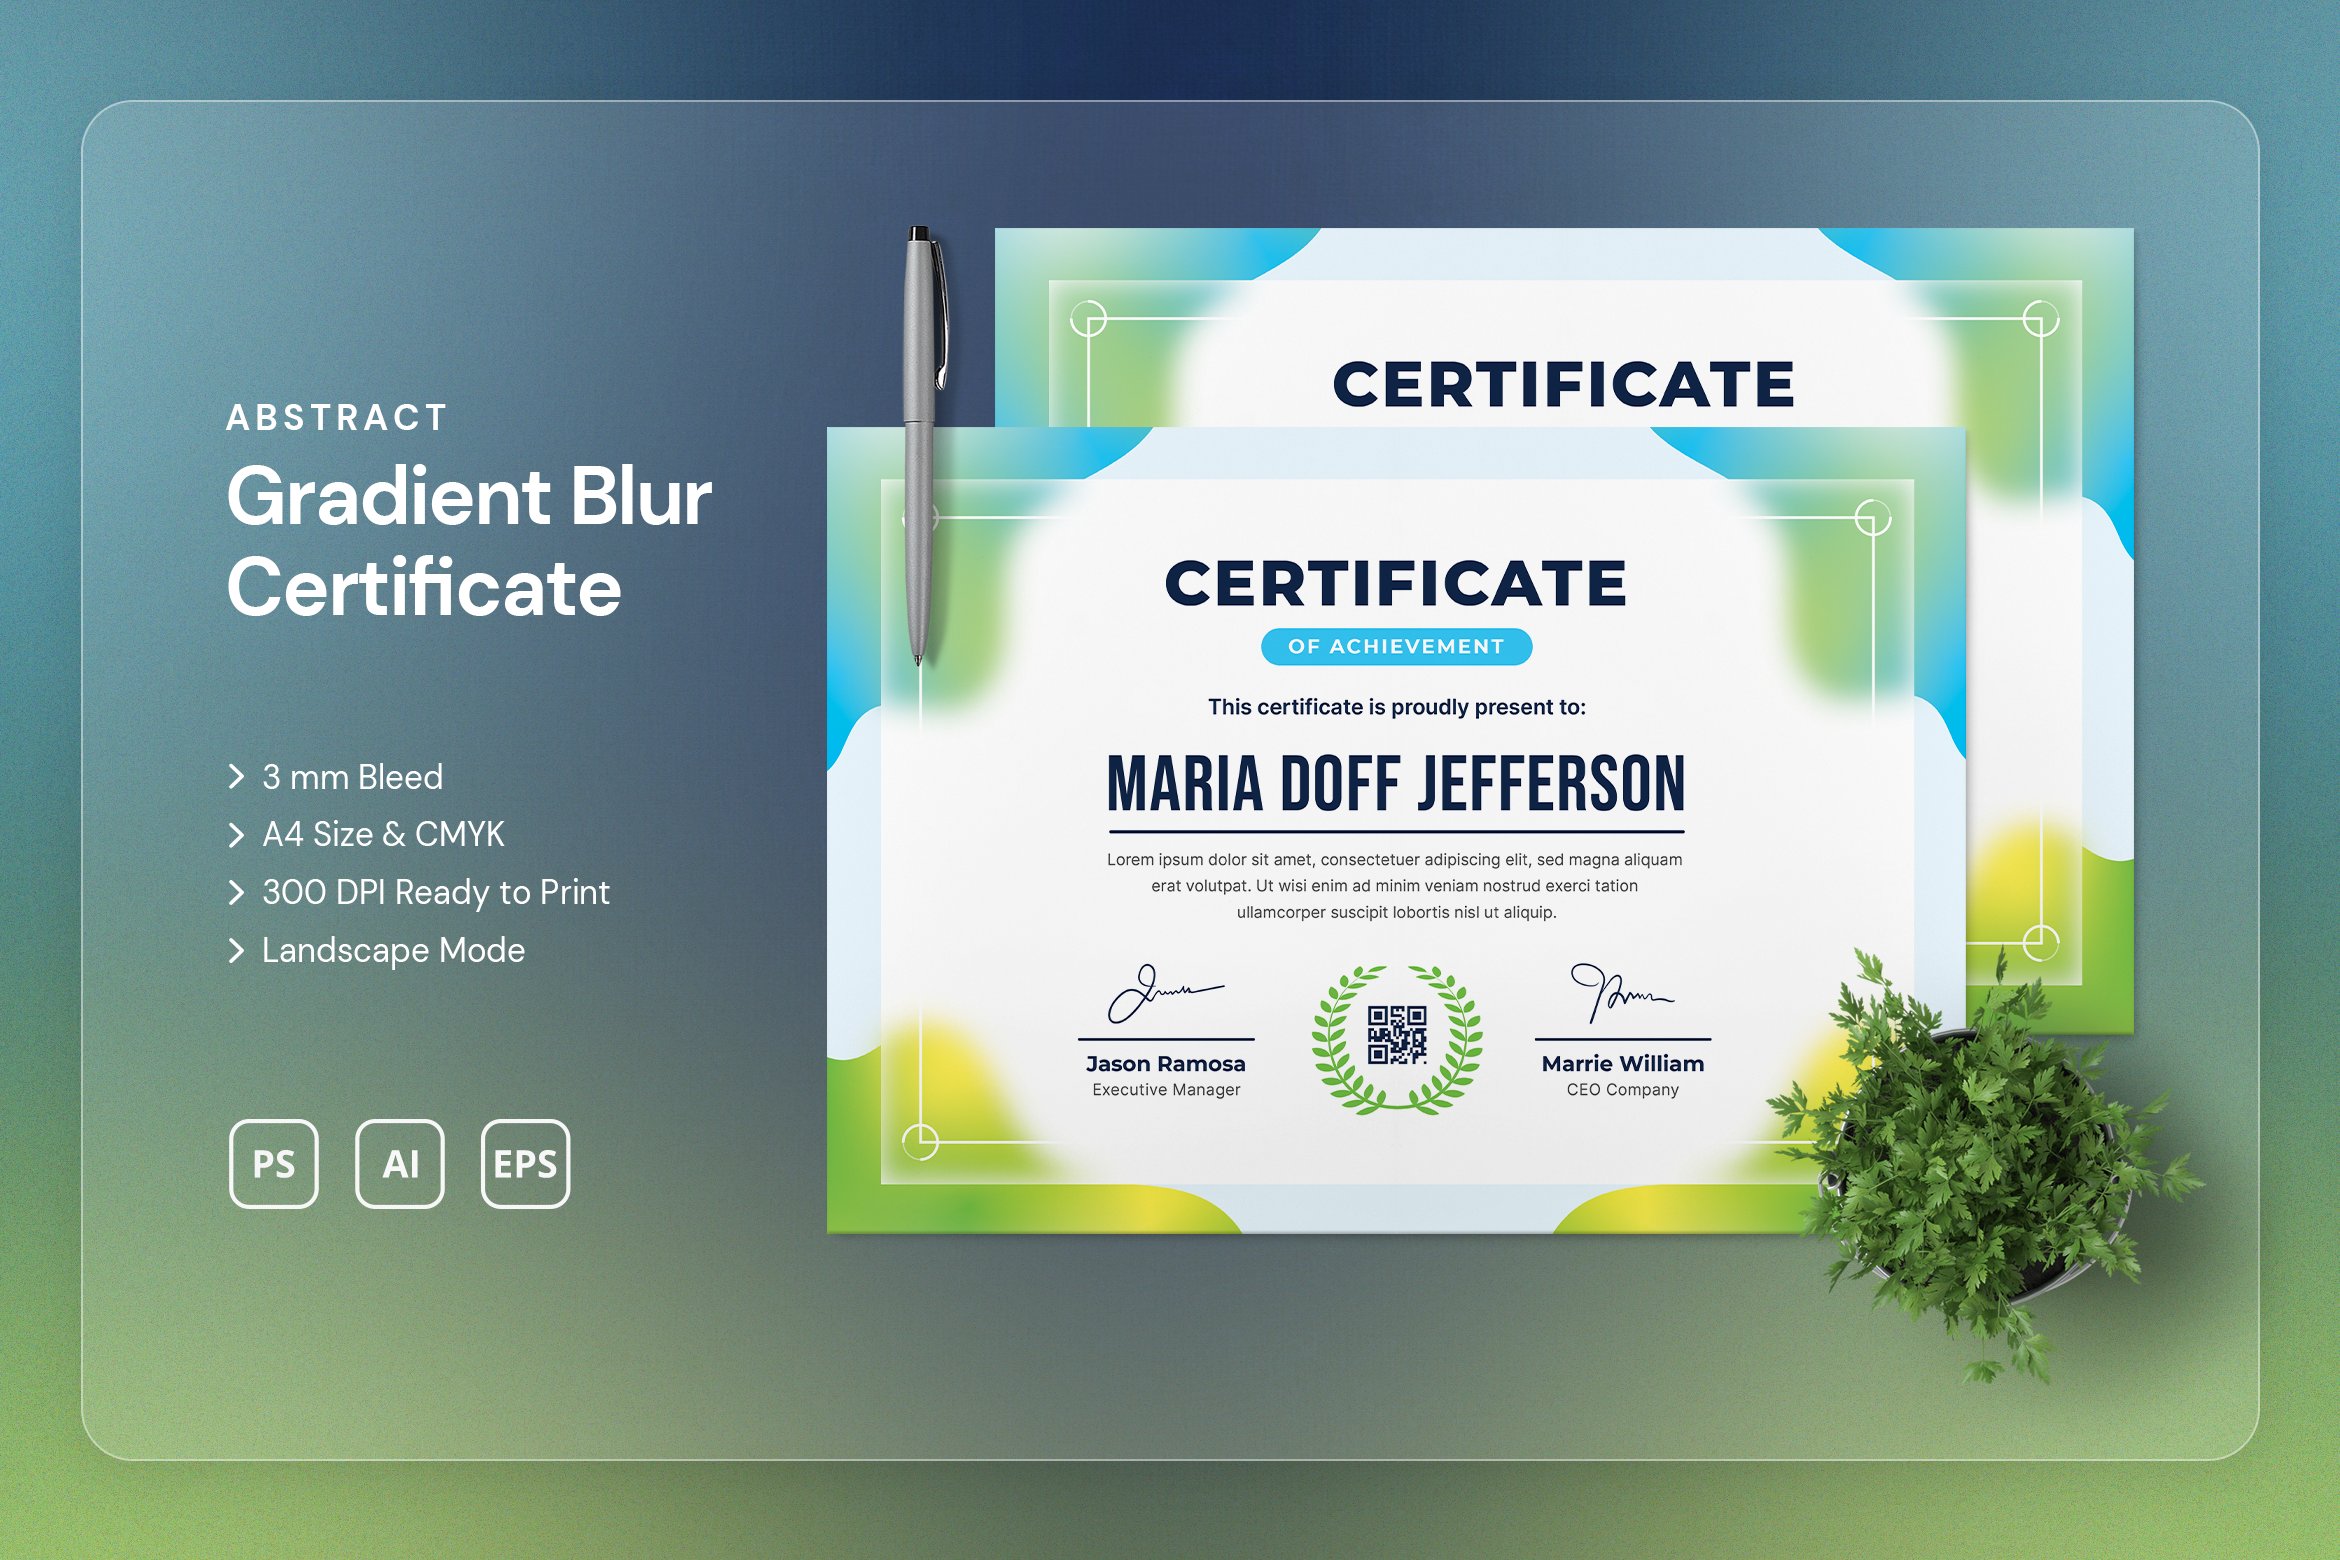 Abstract Gradient  Blur Certificate cover image.